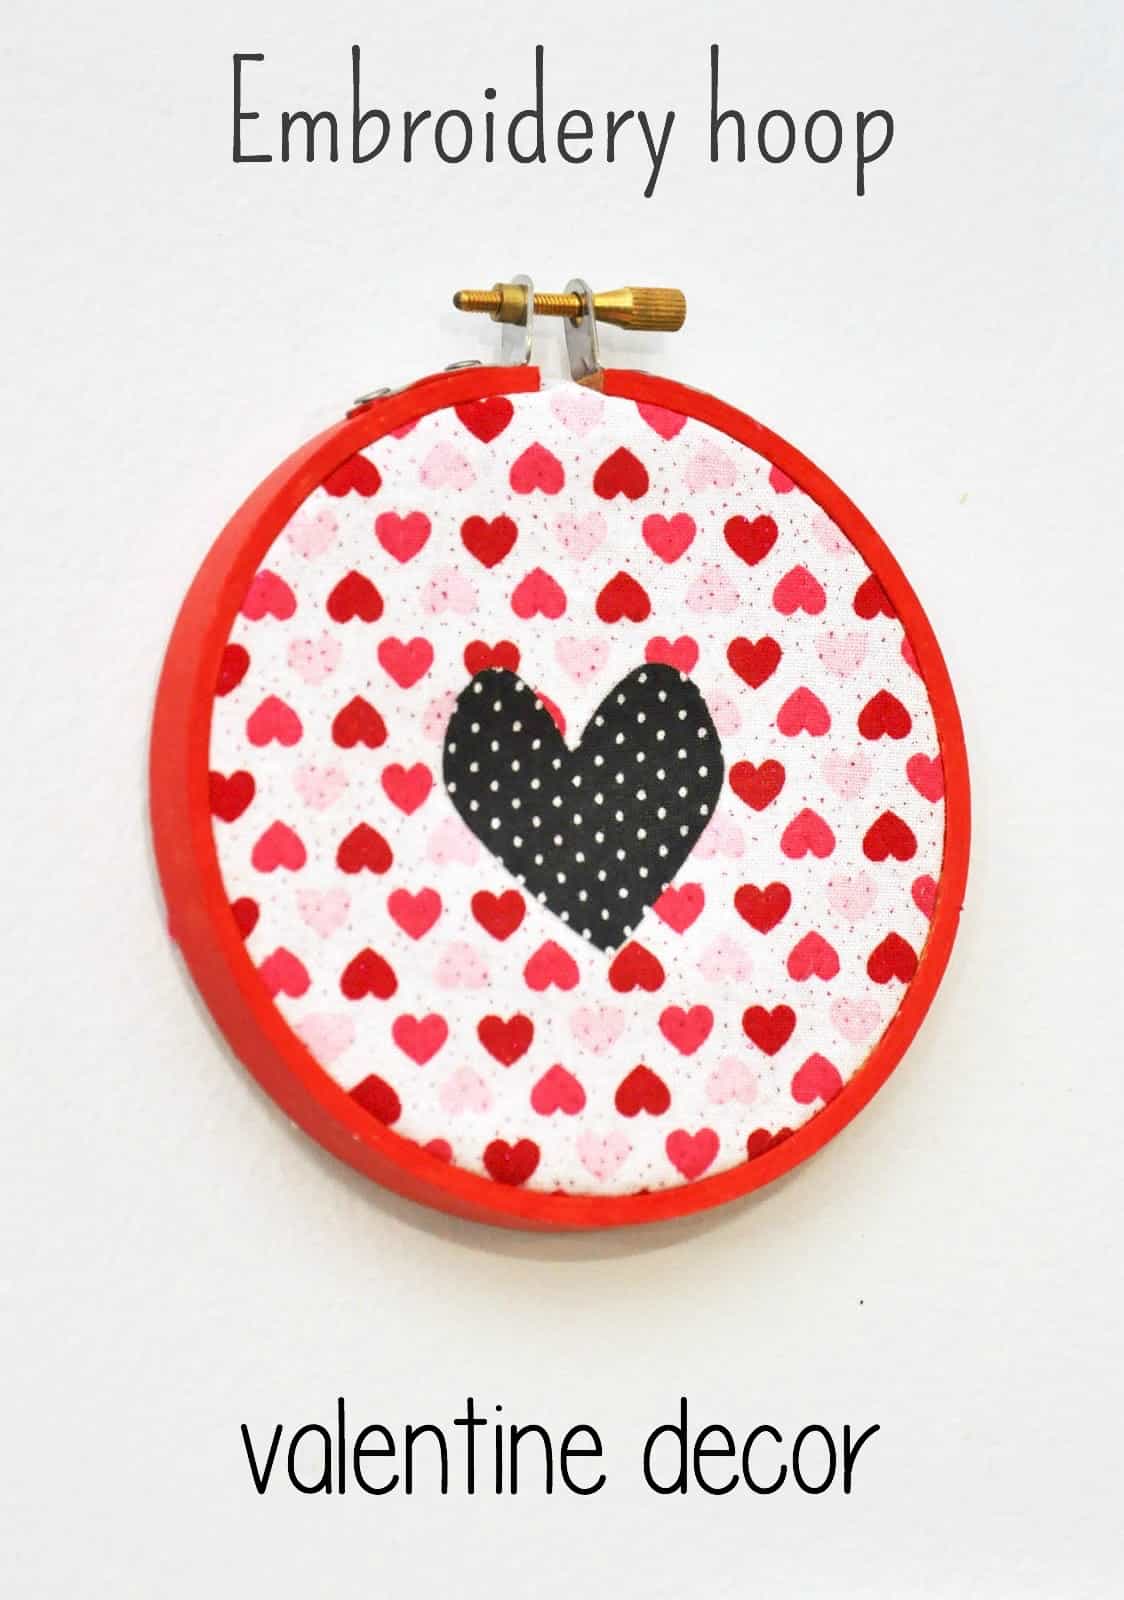 Valentine embroidery hoop with heart fabric